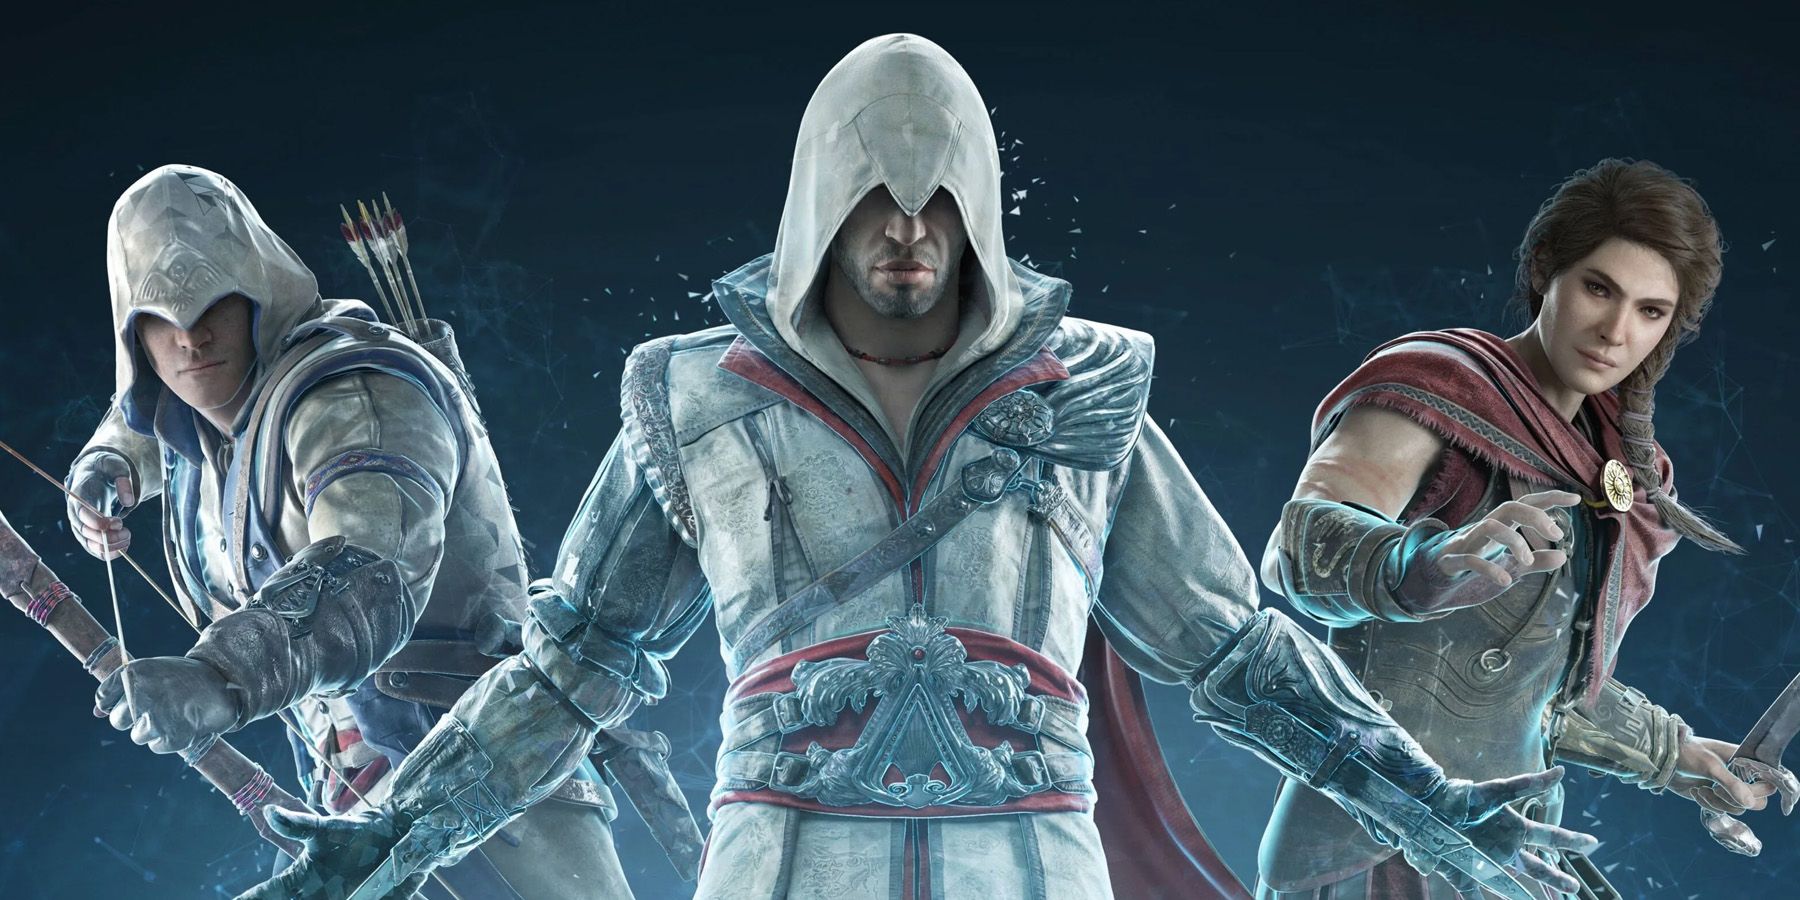 Ezio in front of Connor and Kassandra in key art for Assassin's Creed Nexus VR.